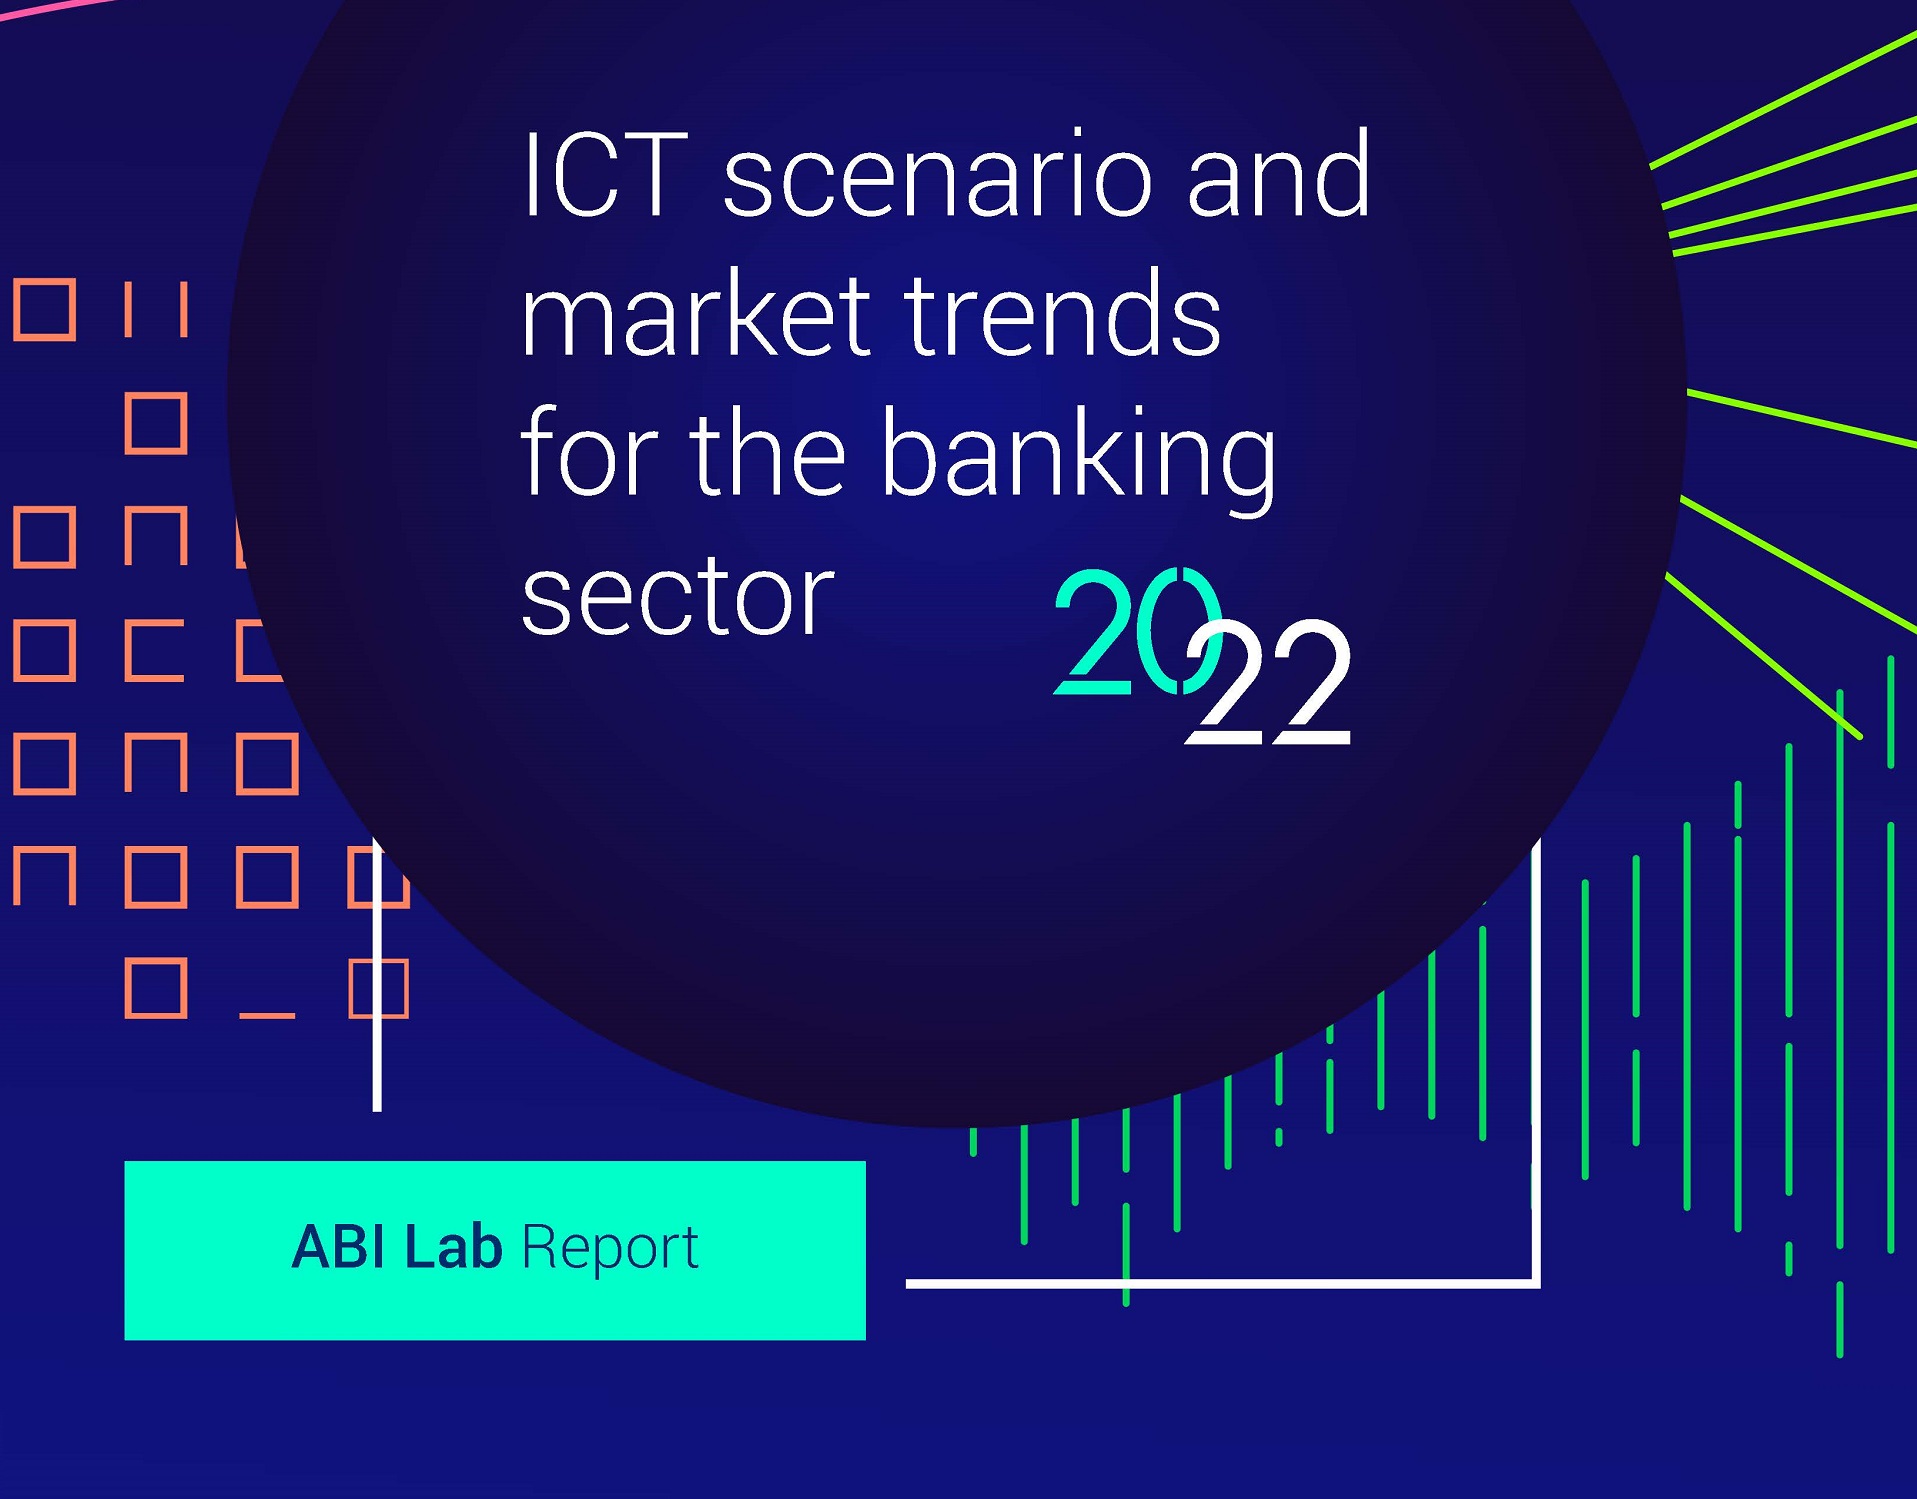 ABI Lab Report 2022 - ICT scenario and market trends for the banking sector